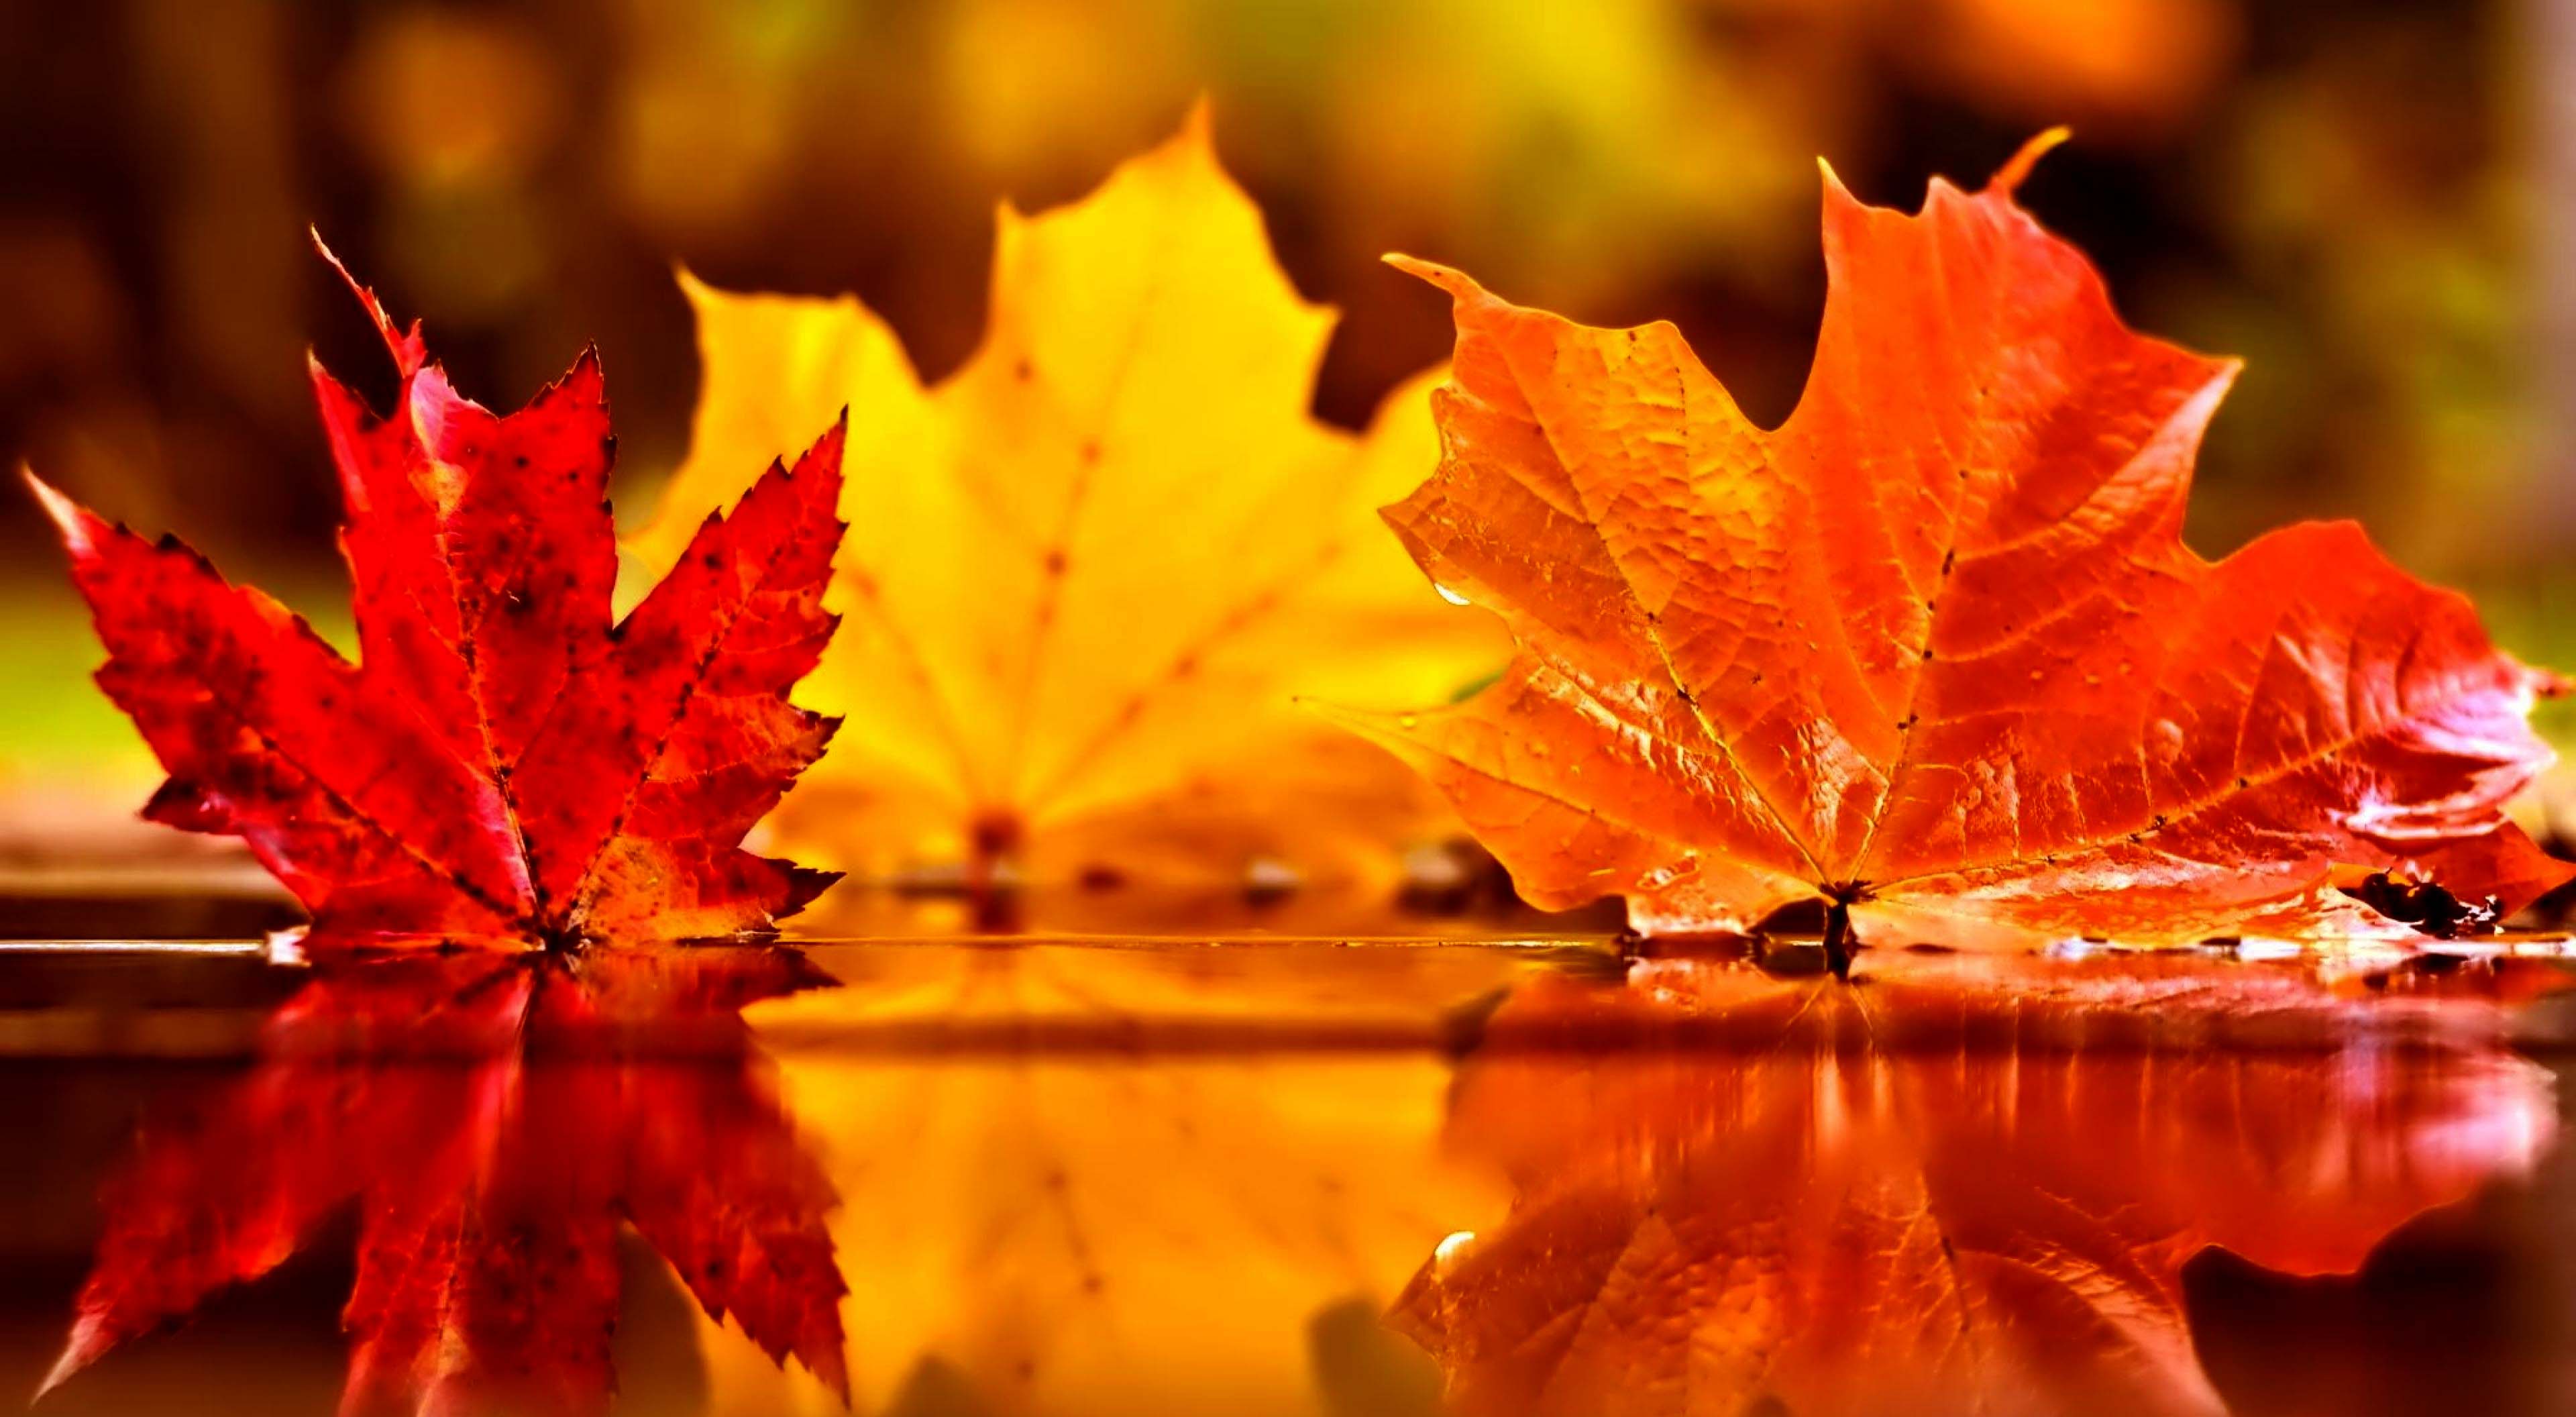 Autumn Leaves On Water Wallpaper Background. Fall Leaves Wallpaper, Leaves Wallpaper and Thanksgiving Leaves Wallpaper